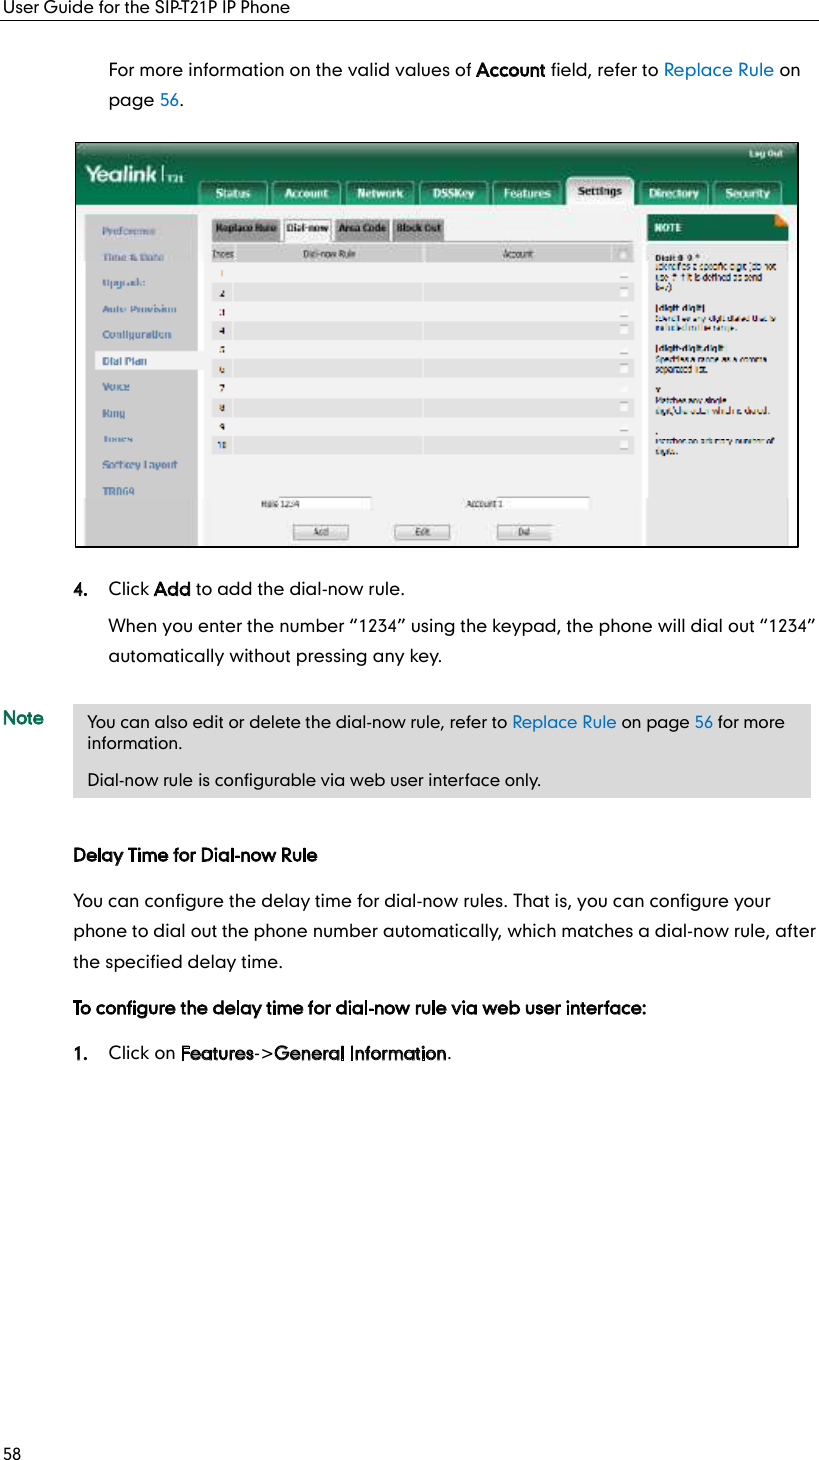 User Guide for the SIP-T21P IP Phone 58 For more information on the valid values of Account field, refer to Replace Rule on page 56.  4. Click Add to add the dial-now rule. When you enter the number  1234  using the keypad, the phone will dial out  1234  automatically without pressing any key. Note Delay Time for Dial-now Rule You can configure the delay time for dial-now rules. That is, you can configure your phone to dial out the phone number automatically, which matches a dial-now rule, after the specified delay time. To configure the delay time for dial-now rule via web user interface: 1. Click on Features-&gt;General Information.    You can also edit or delete the dial-now rule, refer to Replace Rule on page 56 for more information. Dial-now rule is configurable via web user interface only. 